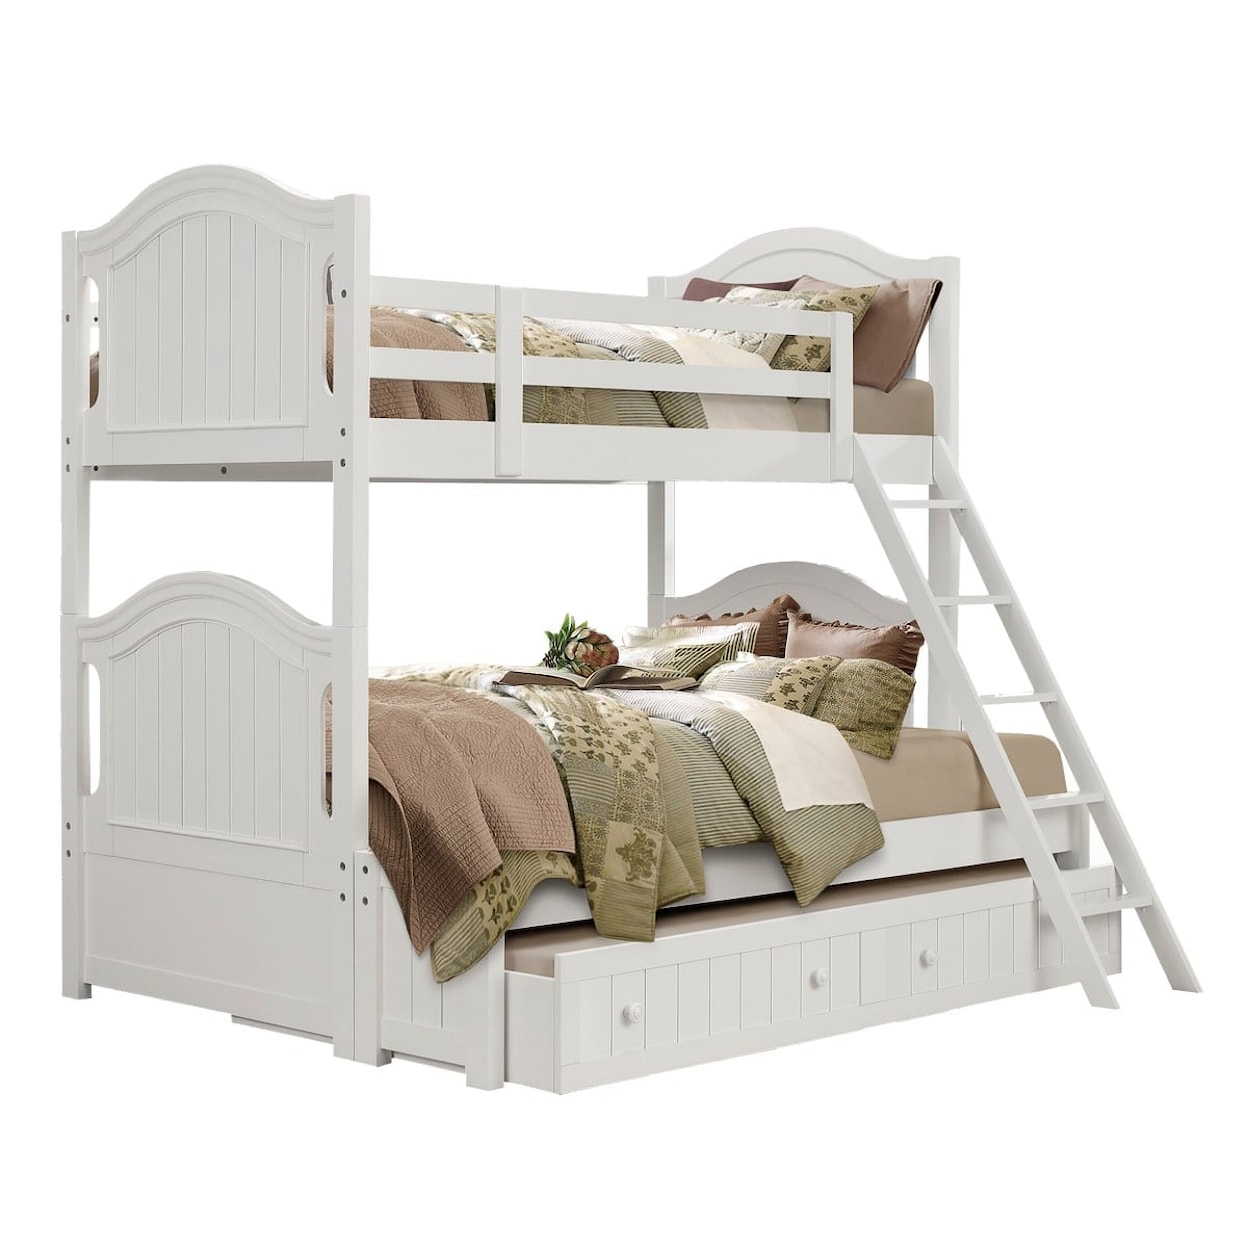 Homelegance Clementine Twin over Full Bunk Bed